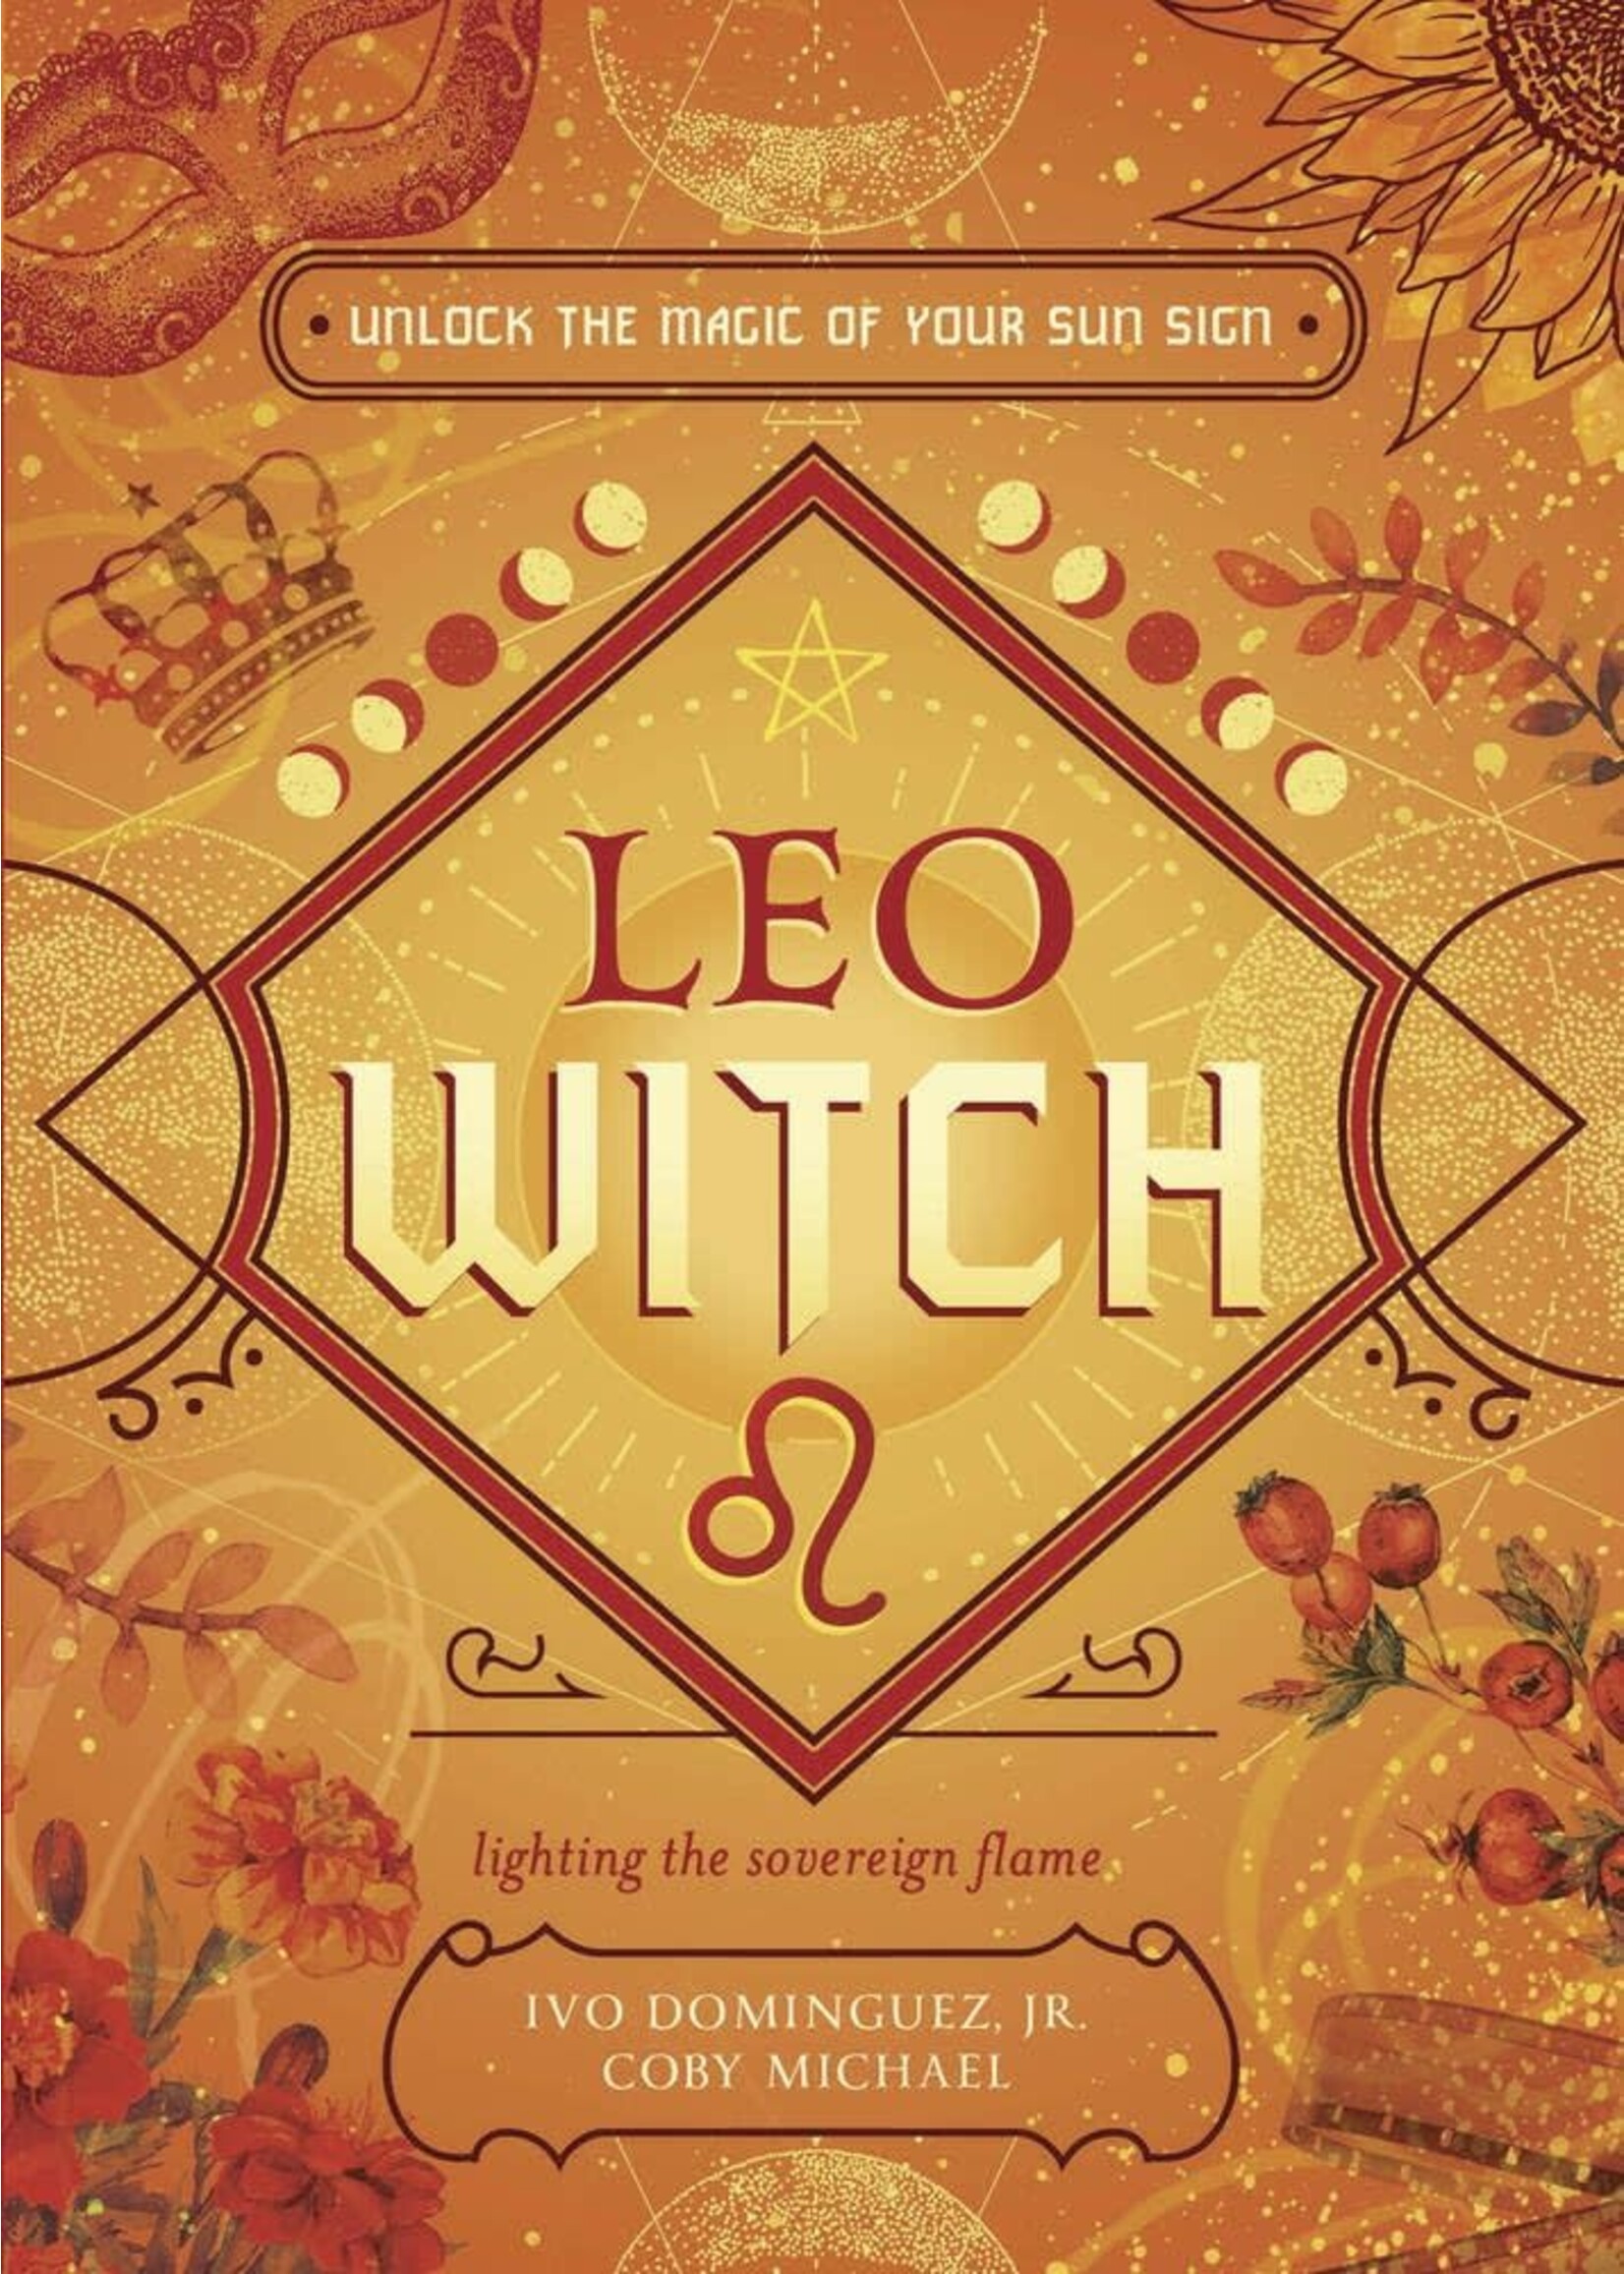 The Witch's Sun Sign Series: Leo Witch by Ivo Dominguez Jr. & Coby Michael